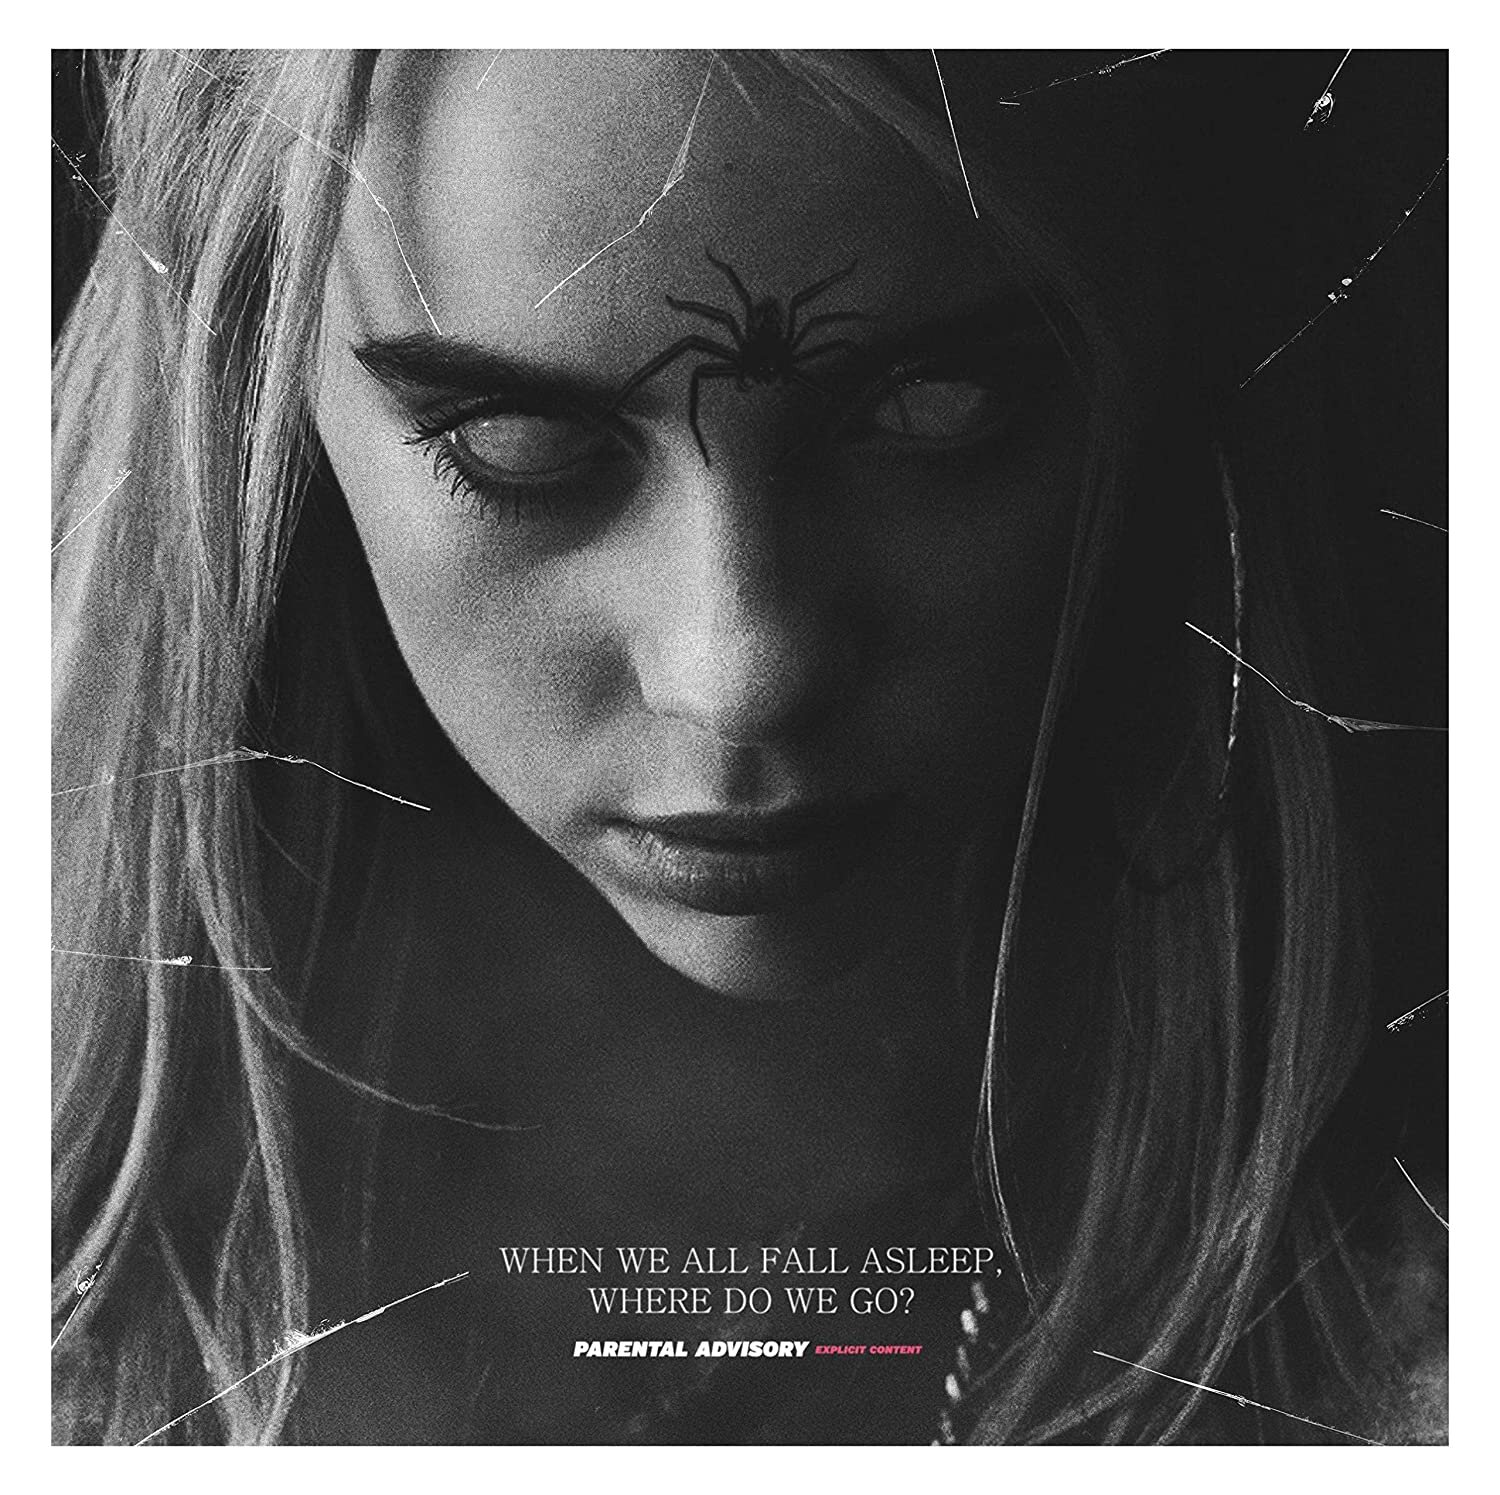 Billie Eilish - go? Poster we fall where all do we — asleep, CLASSIIFIED When